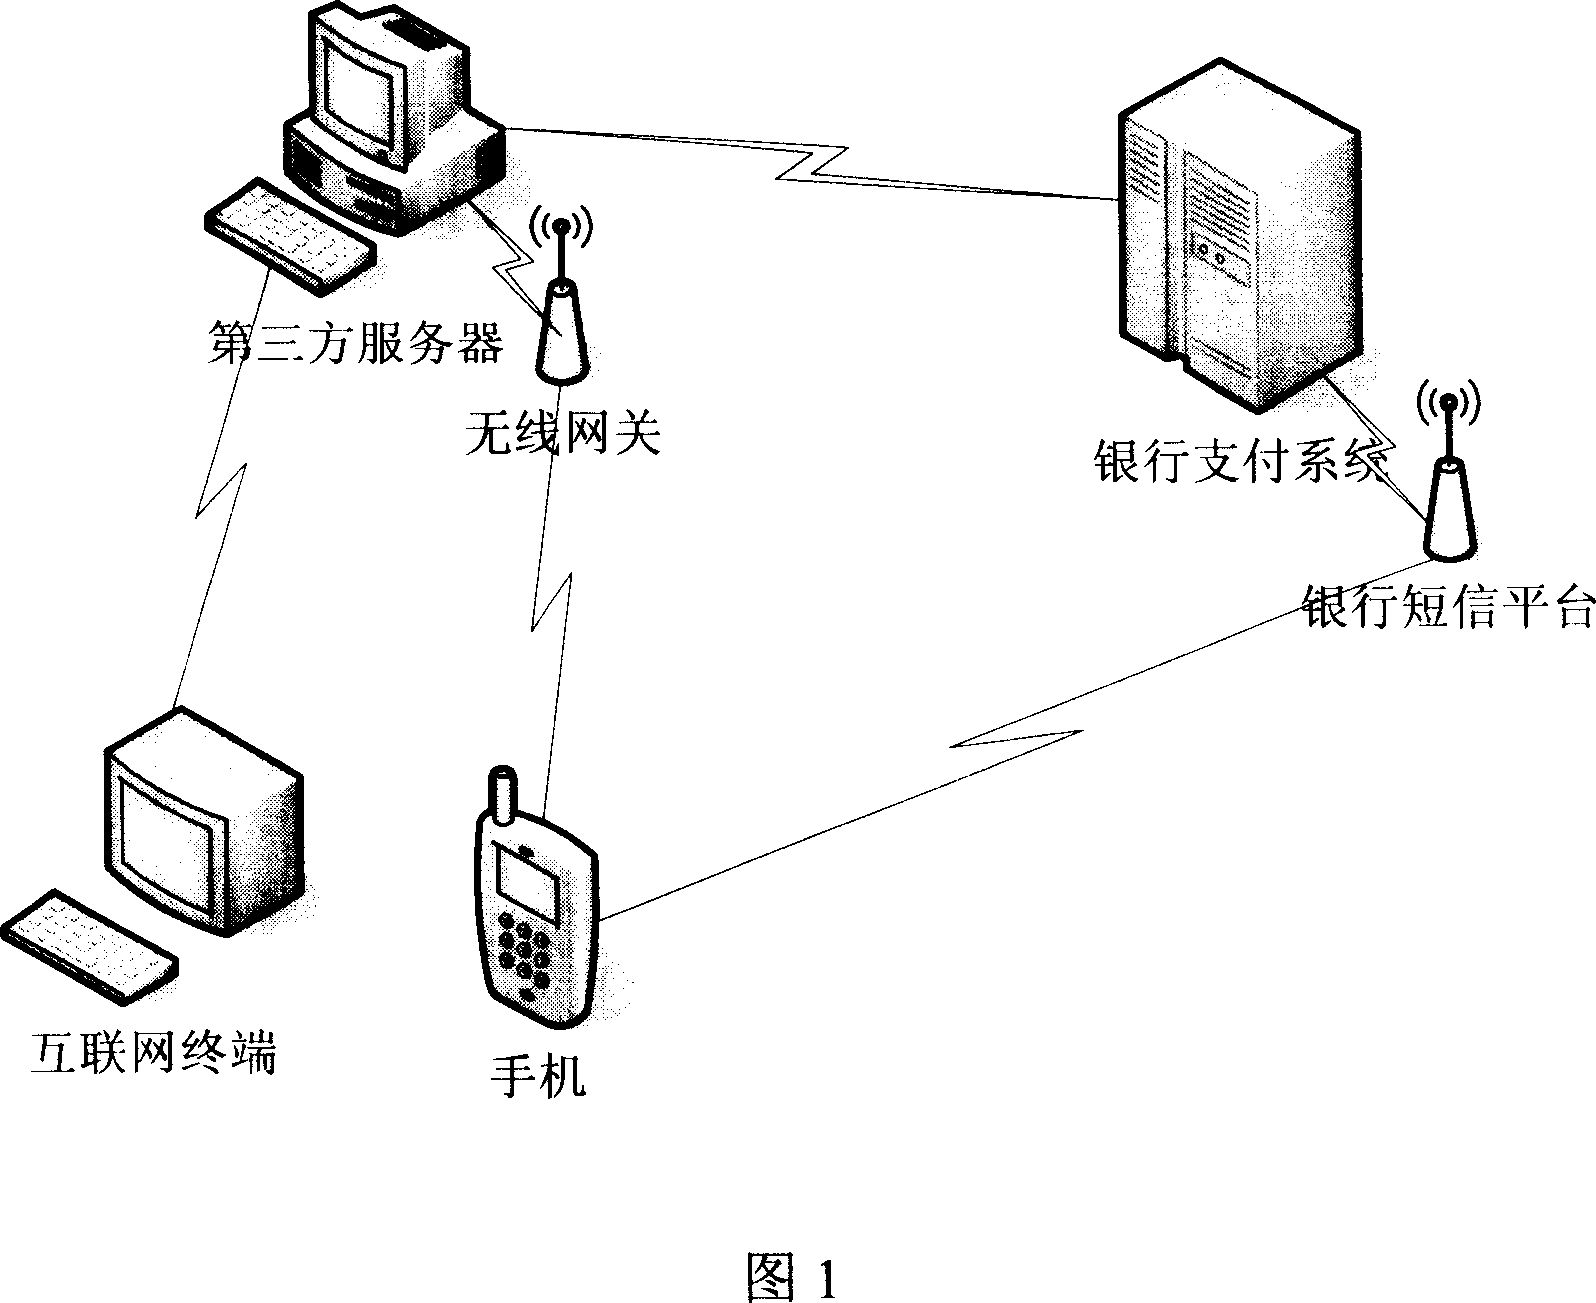 Method for safety verifying financial business information in electronic business